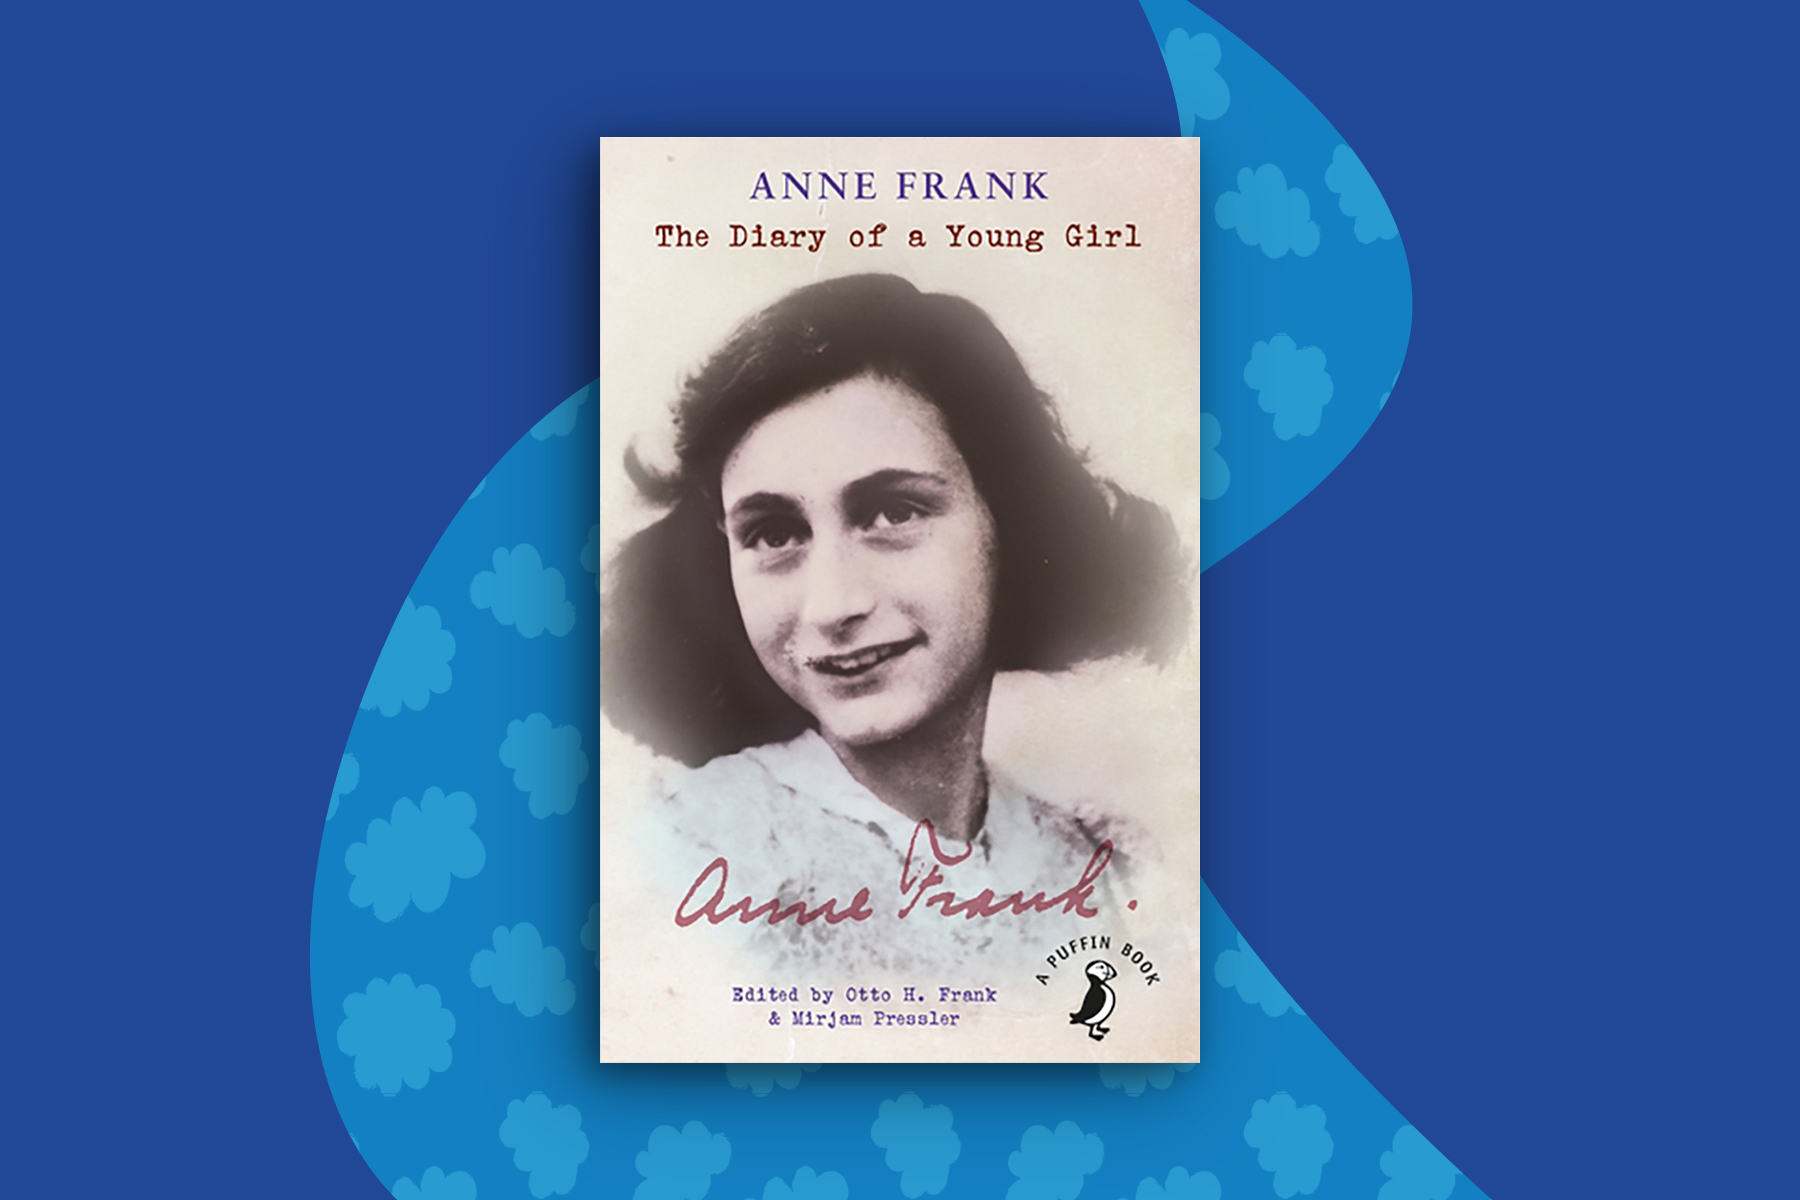 Extract | The Diary of a Young Girl by Anne Frank